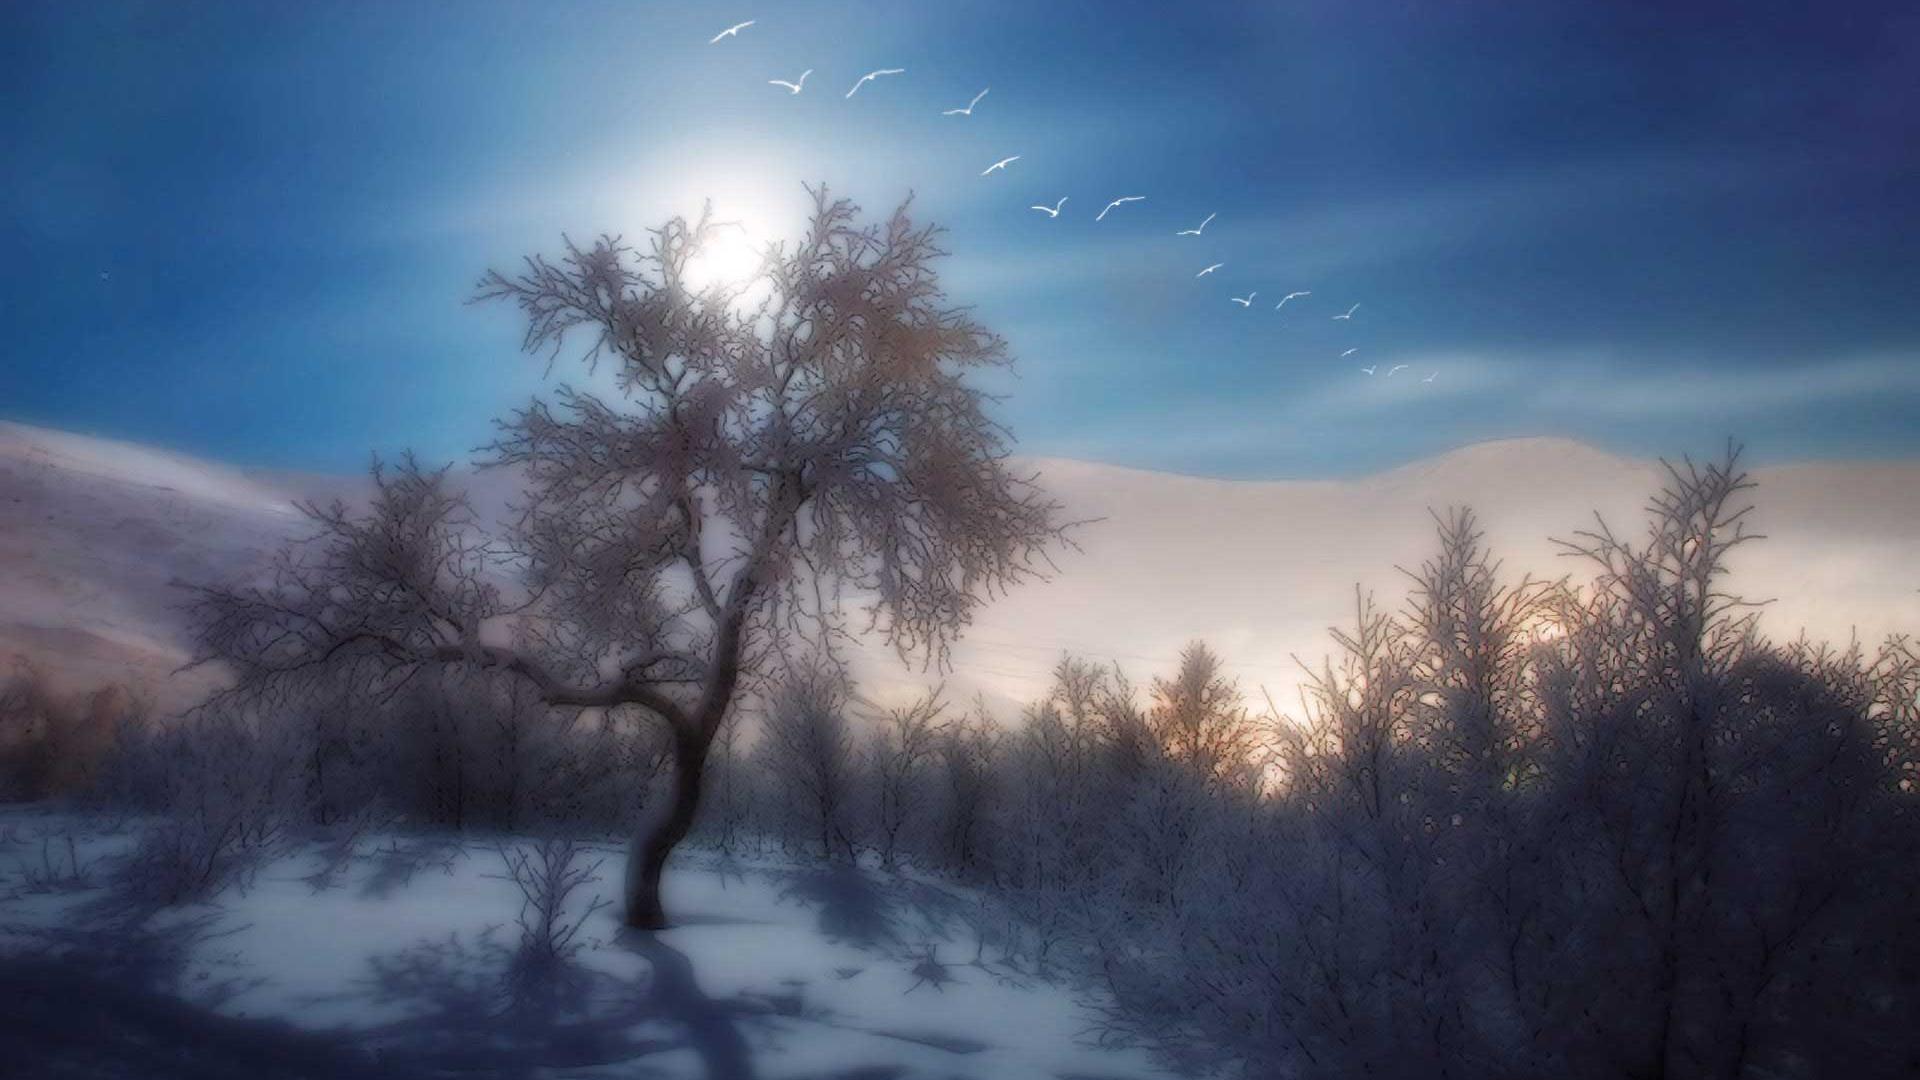 HD Snow World And Birds Of Winter Wallpaper Wide